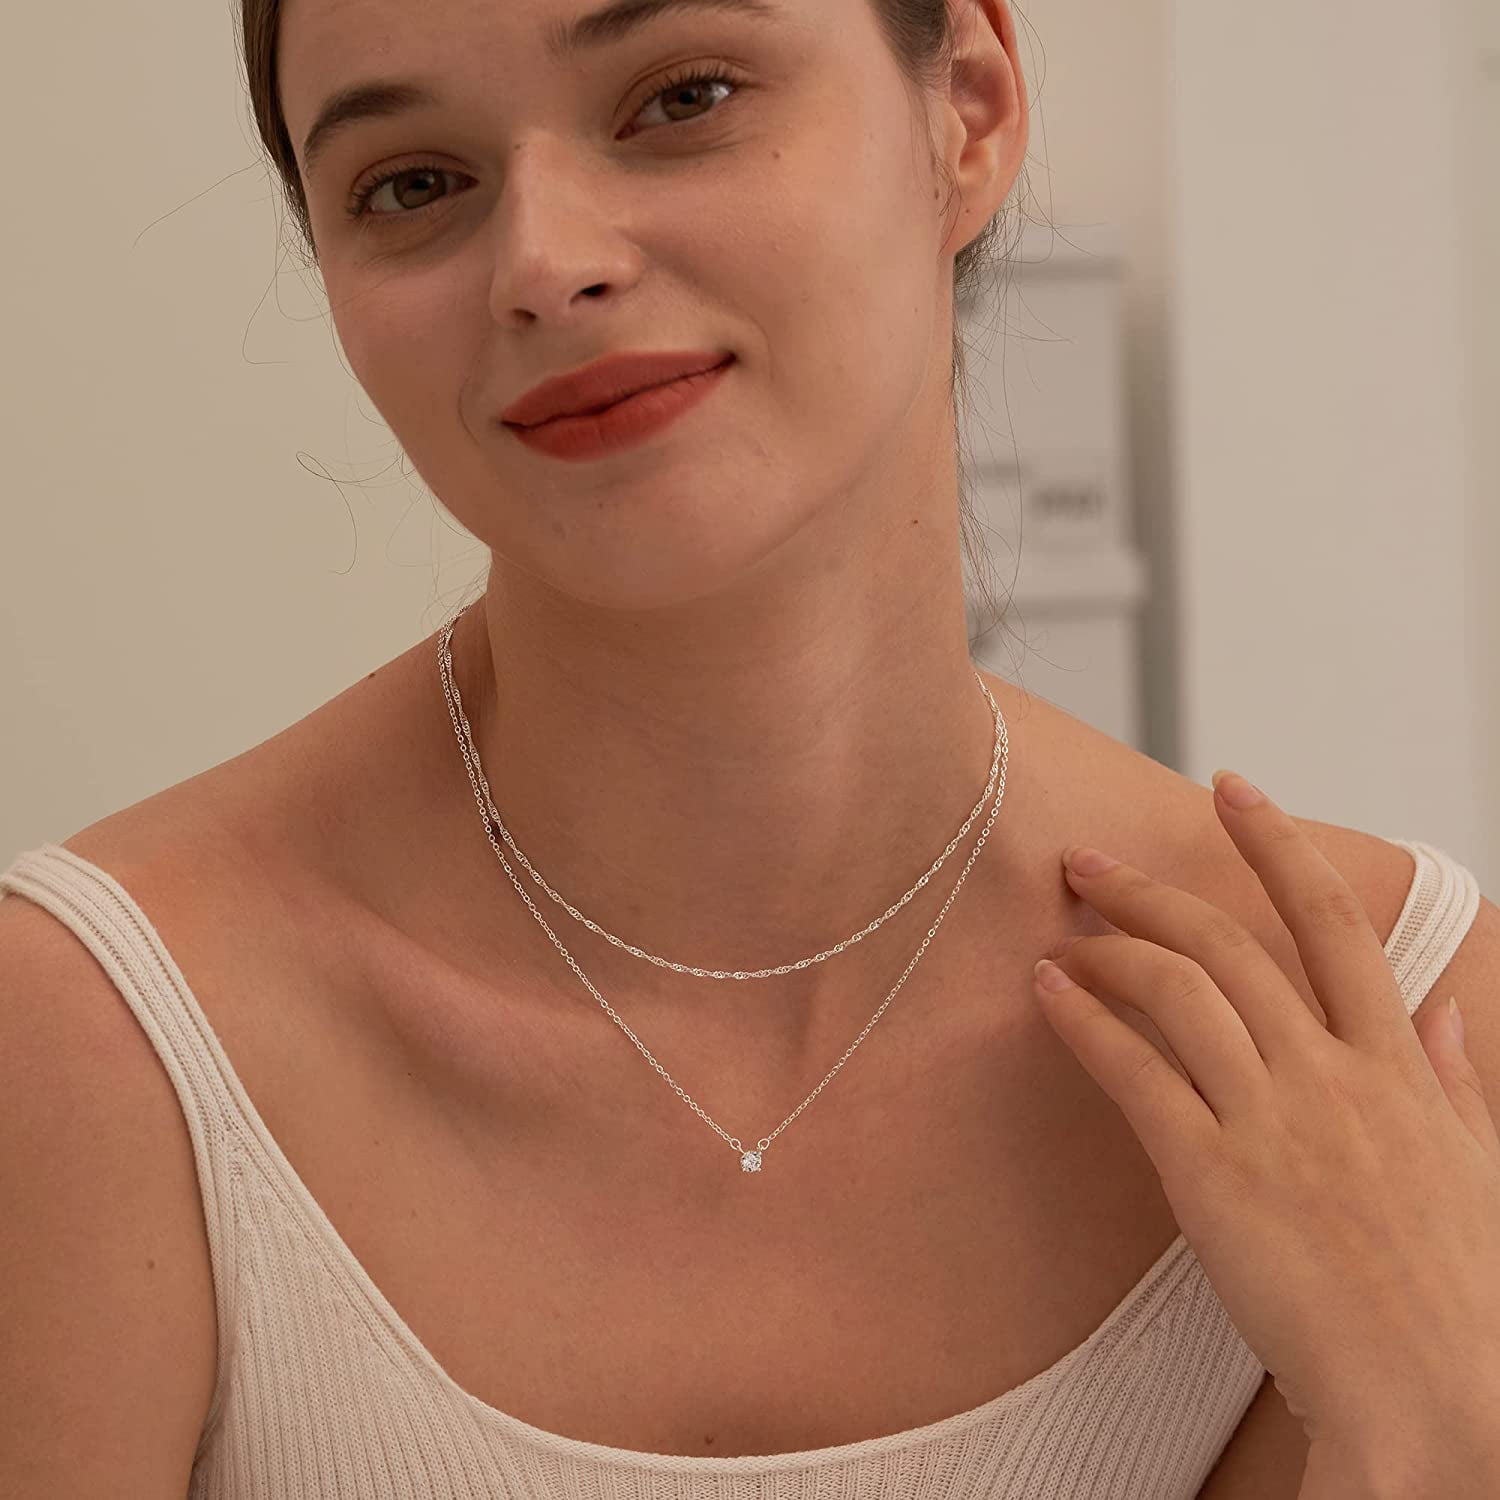 Dainty Sterling Silver Necklace With A Swarovski Drop Bead, Silver Collar,  Choker Necklace, Layering Necklace, Silver Necklace, 306 - Etsy